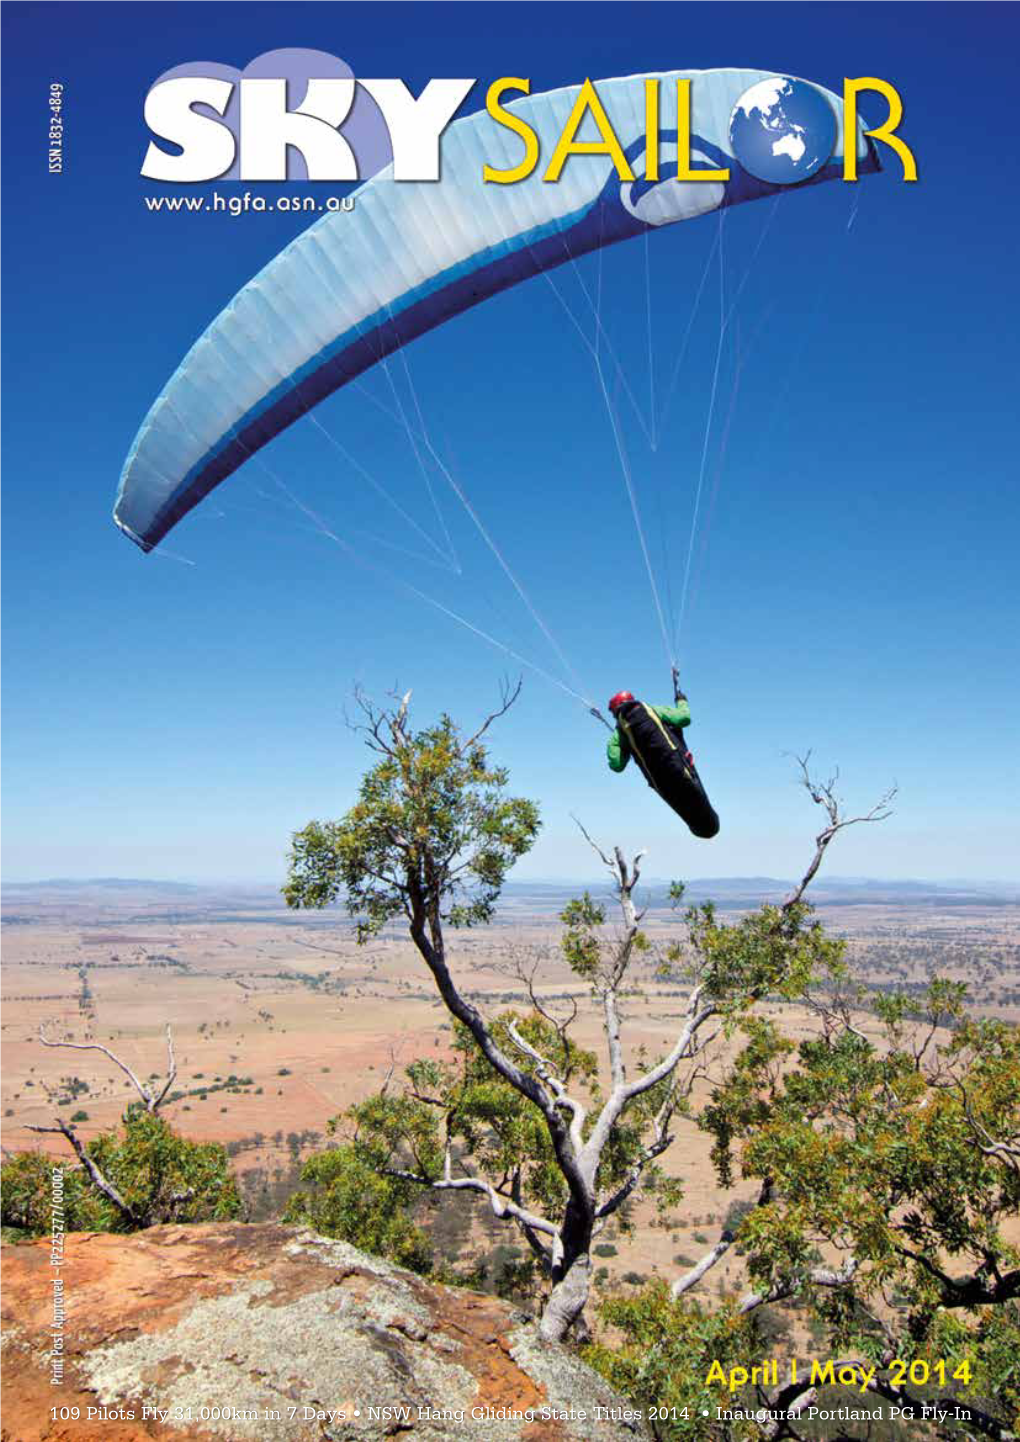 109 Pilots Fly 31,000Km in 7 Days • NSW Hang Gliding State Titles